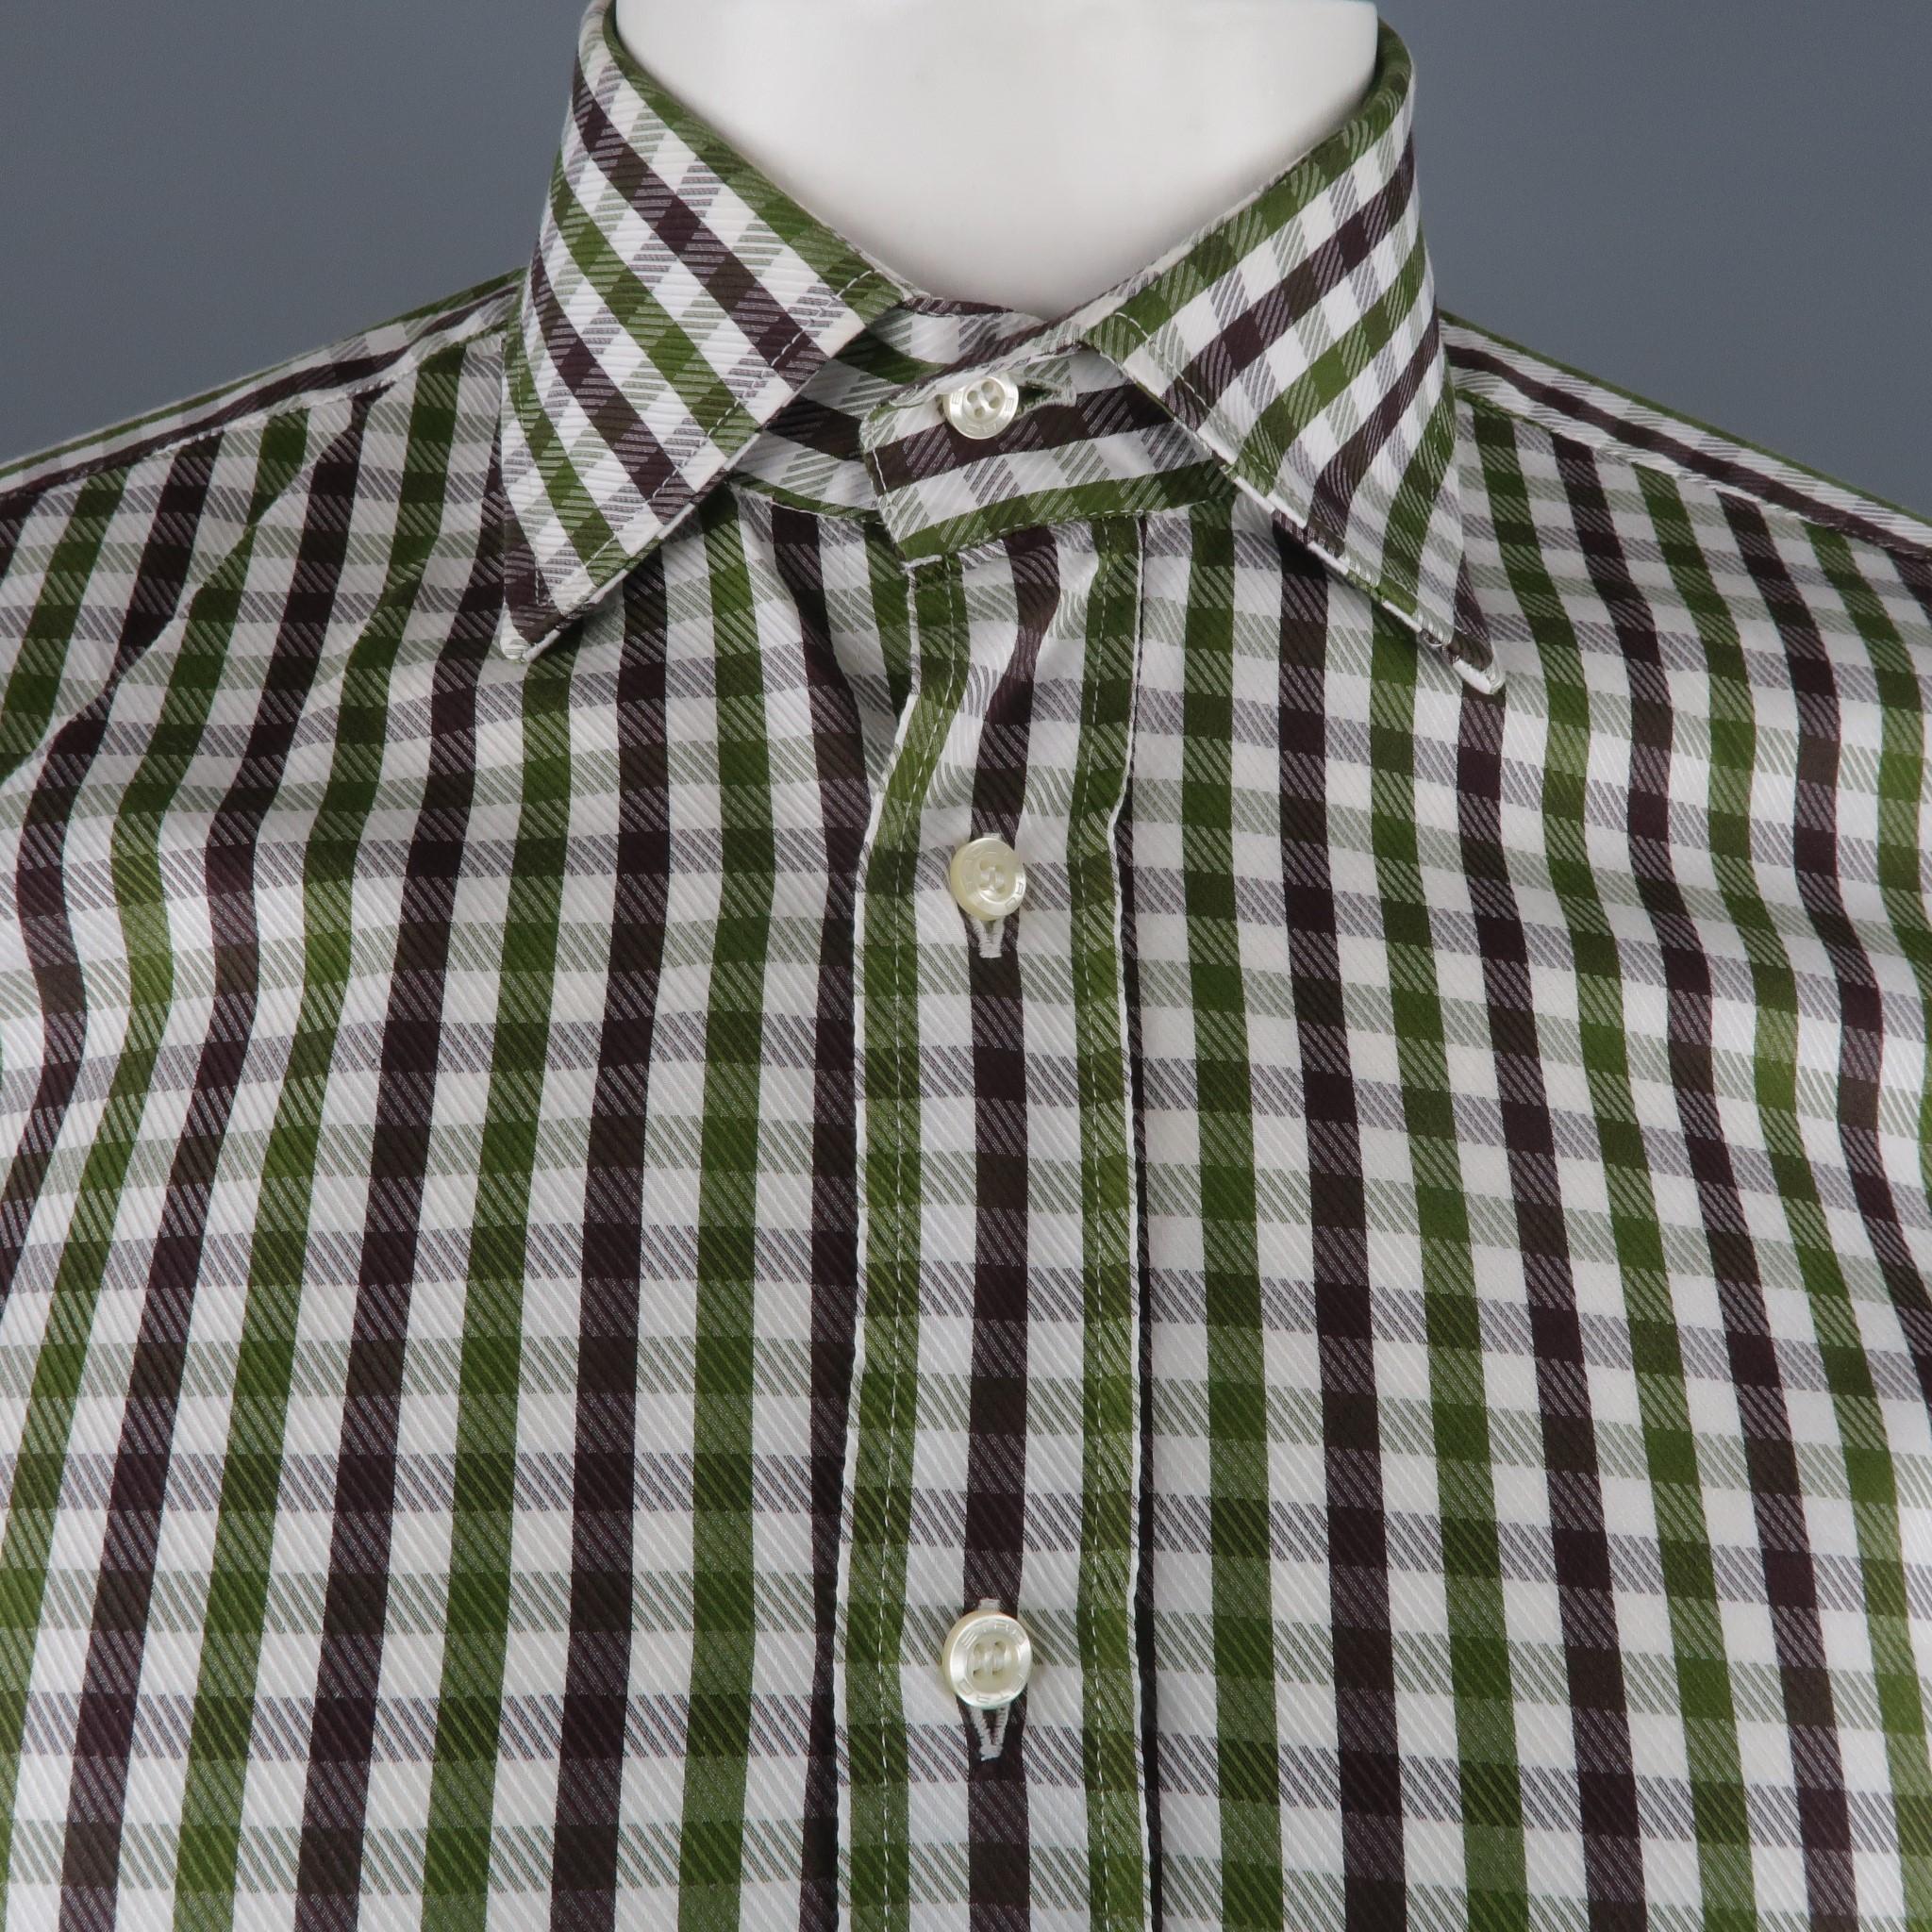 ETRO long sleeve shirt comes in a white and green checkered cotton featuring a spread collar. Made in Italy.
 
Very Good Pre-Owned Condition.
Marked: 39
 
Measurements:
 
Shoulder: 17.5 in.
Chest: 45 in.
Sleeve: 25.5 in.
Length: 25.5 in.
SKU: